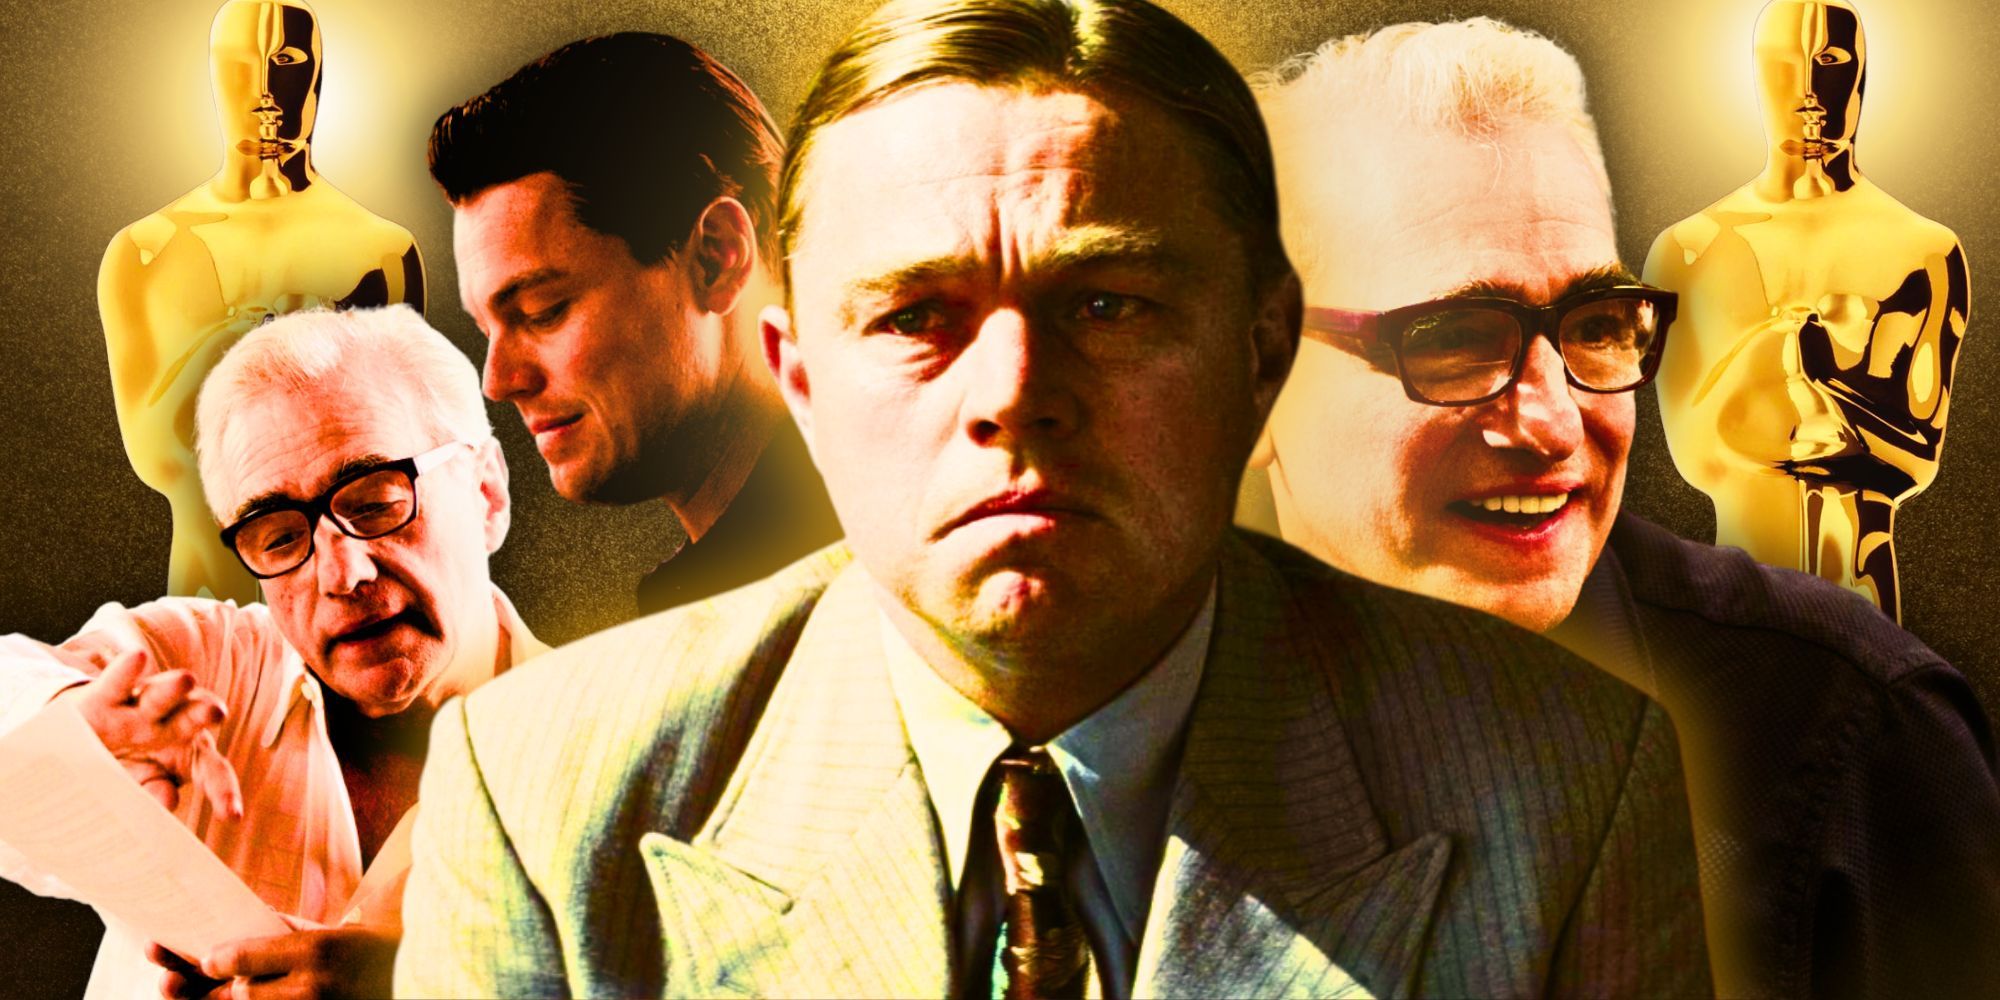 Leonardo DiCaprio in Killers of the Flower Moon and Martin Scorsese surrounded by Oscars